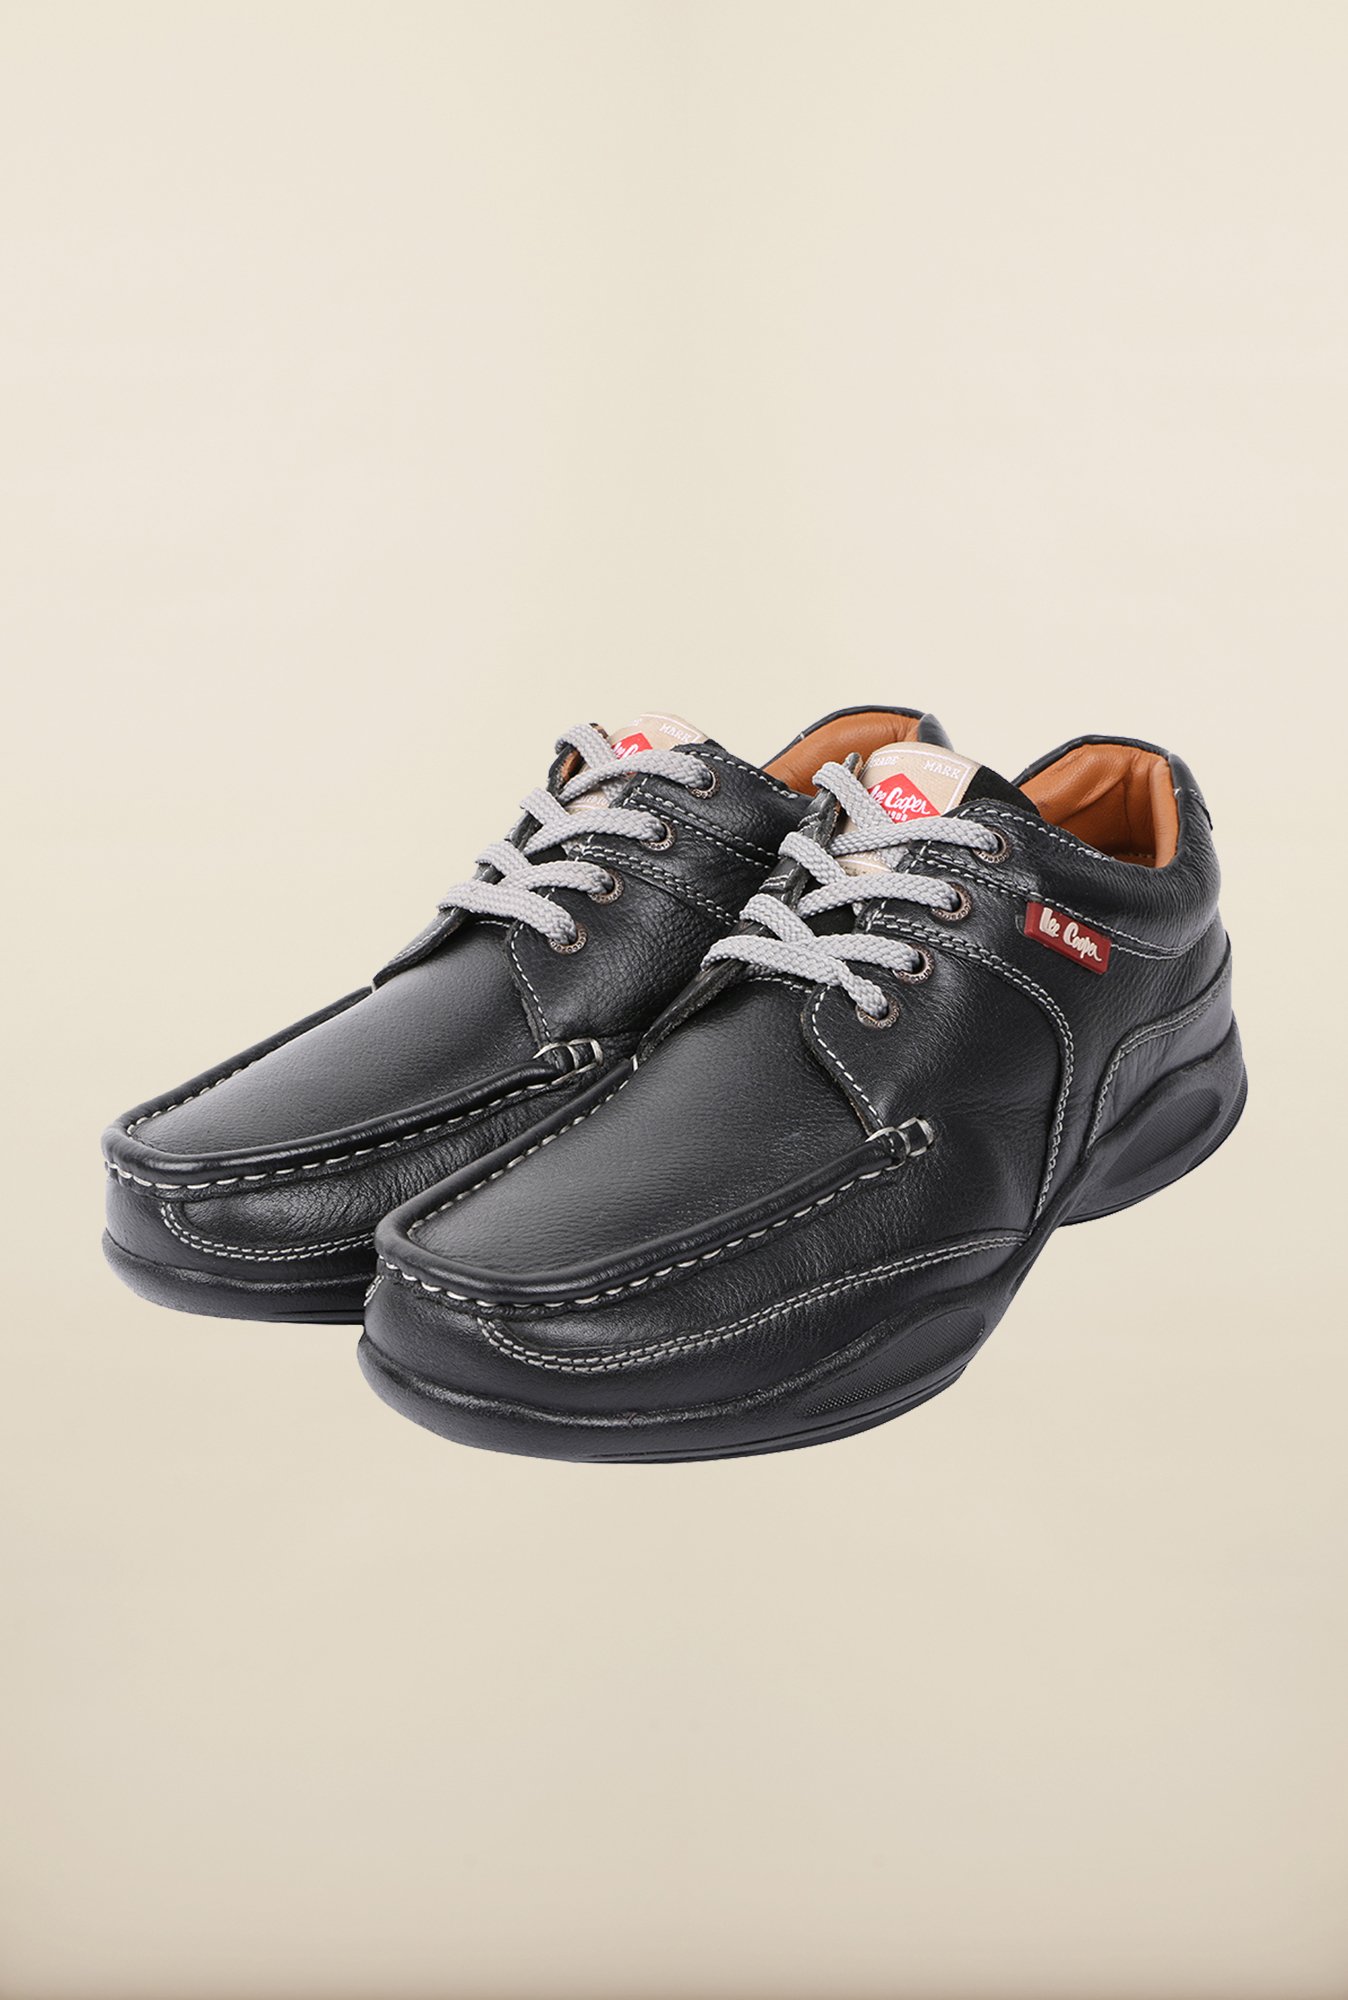 lee cooper casual shoes black